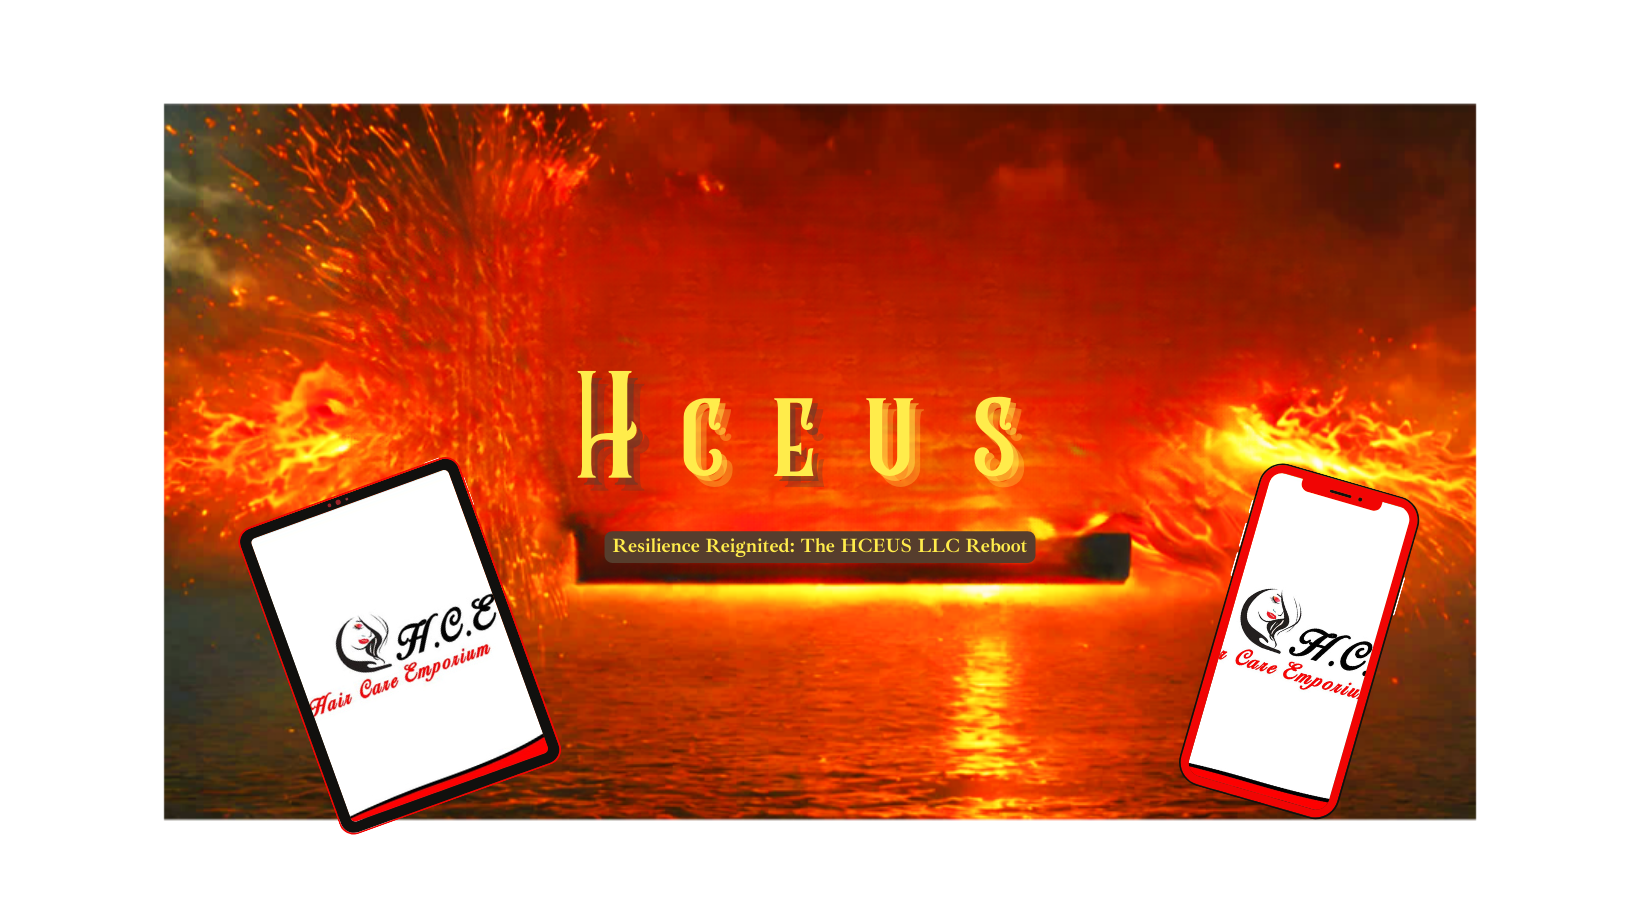 Relaunch of HCEUS Logo with fiery background and the HCEUS logos on both sides of the image